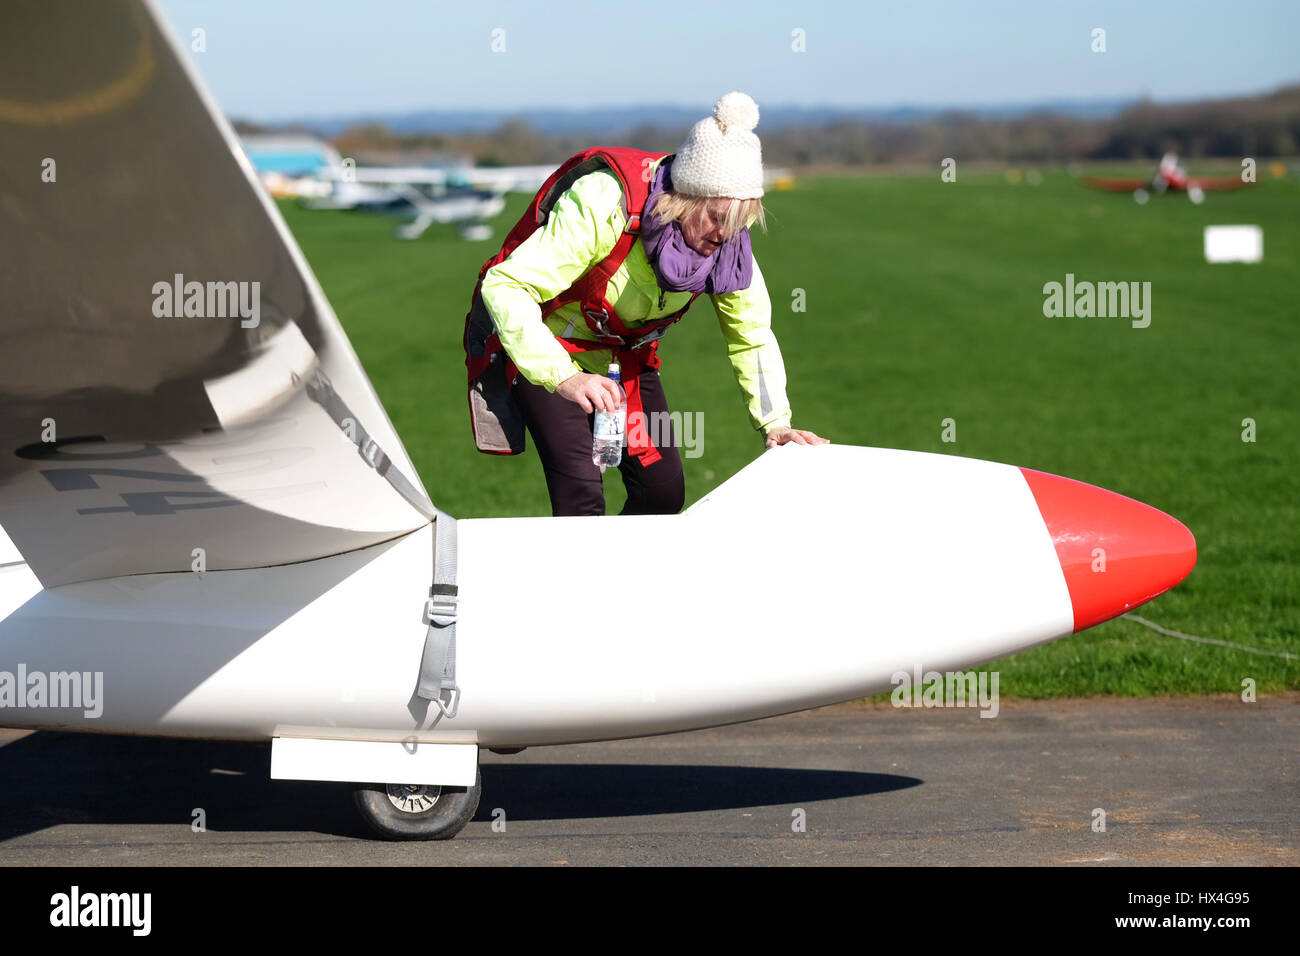 Shobdon airfield,  Busy day at Herefordshire Gliding Club on a day of perfect spring weather. A female glider pilot gets ready to fly her single seat Standard Libelle glider. Stock Photo